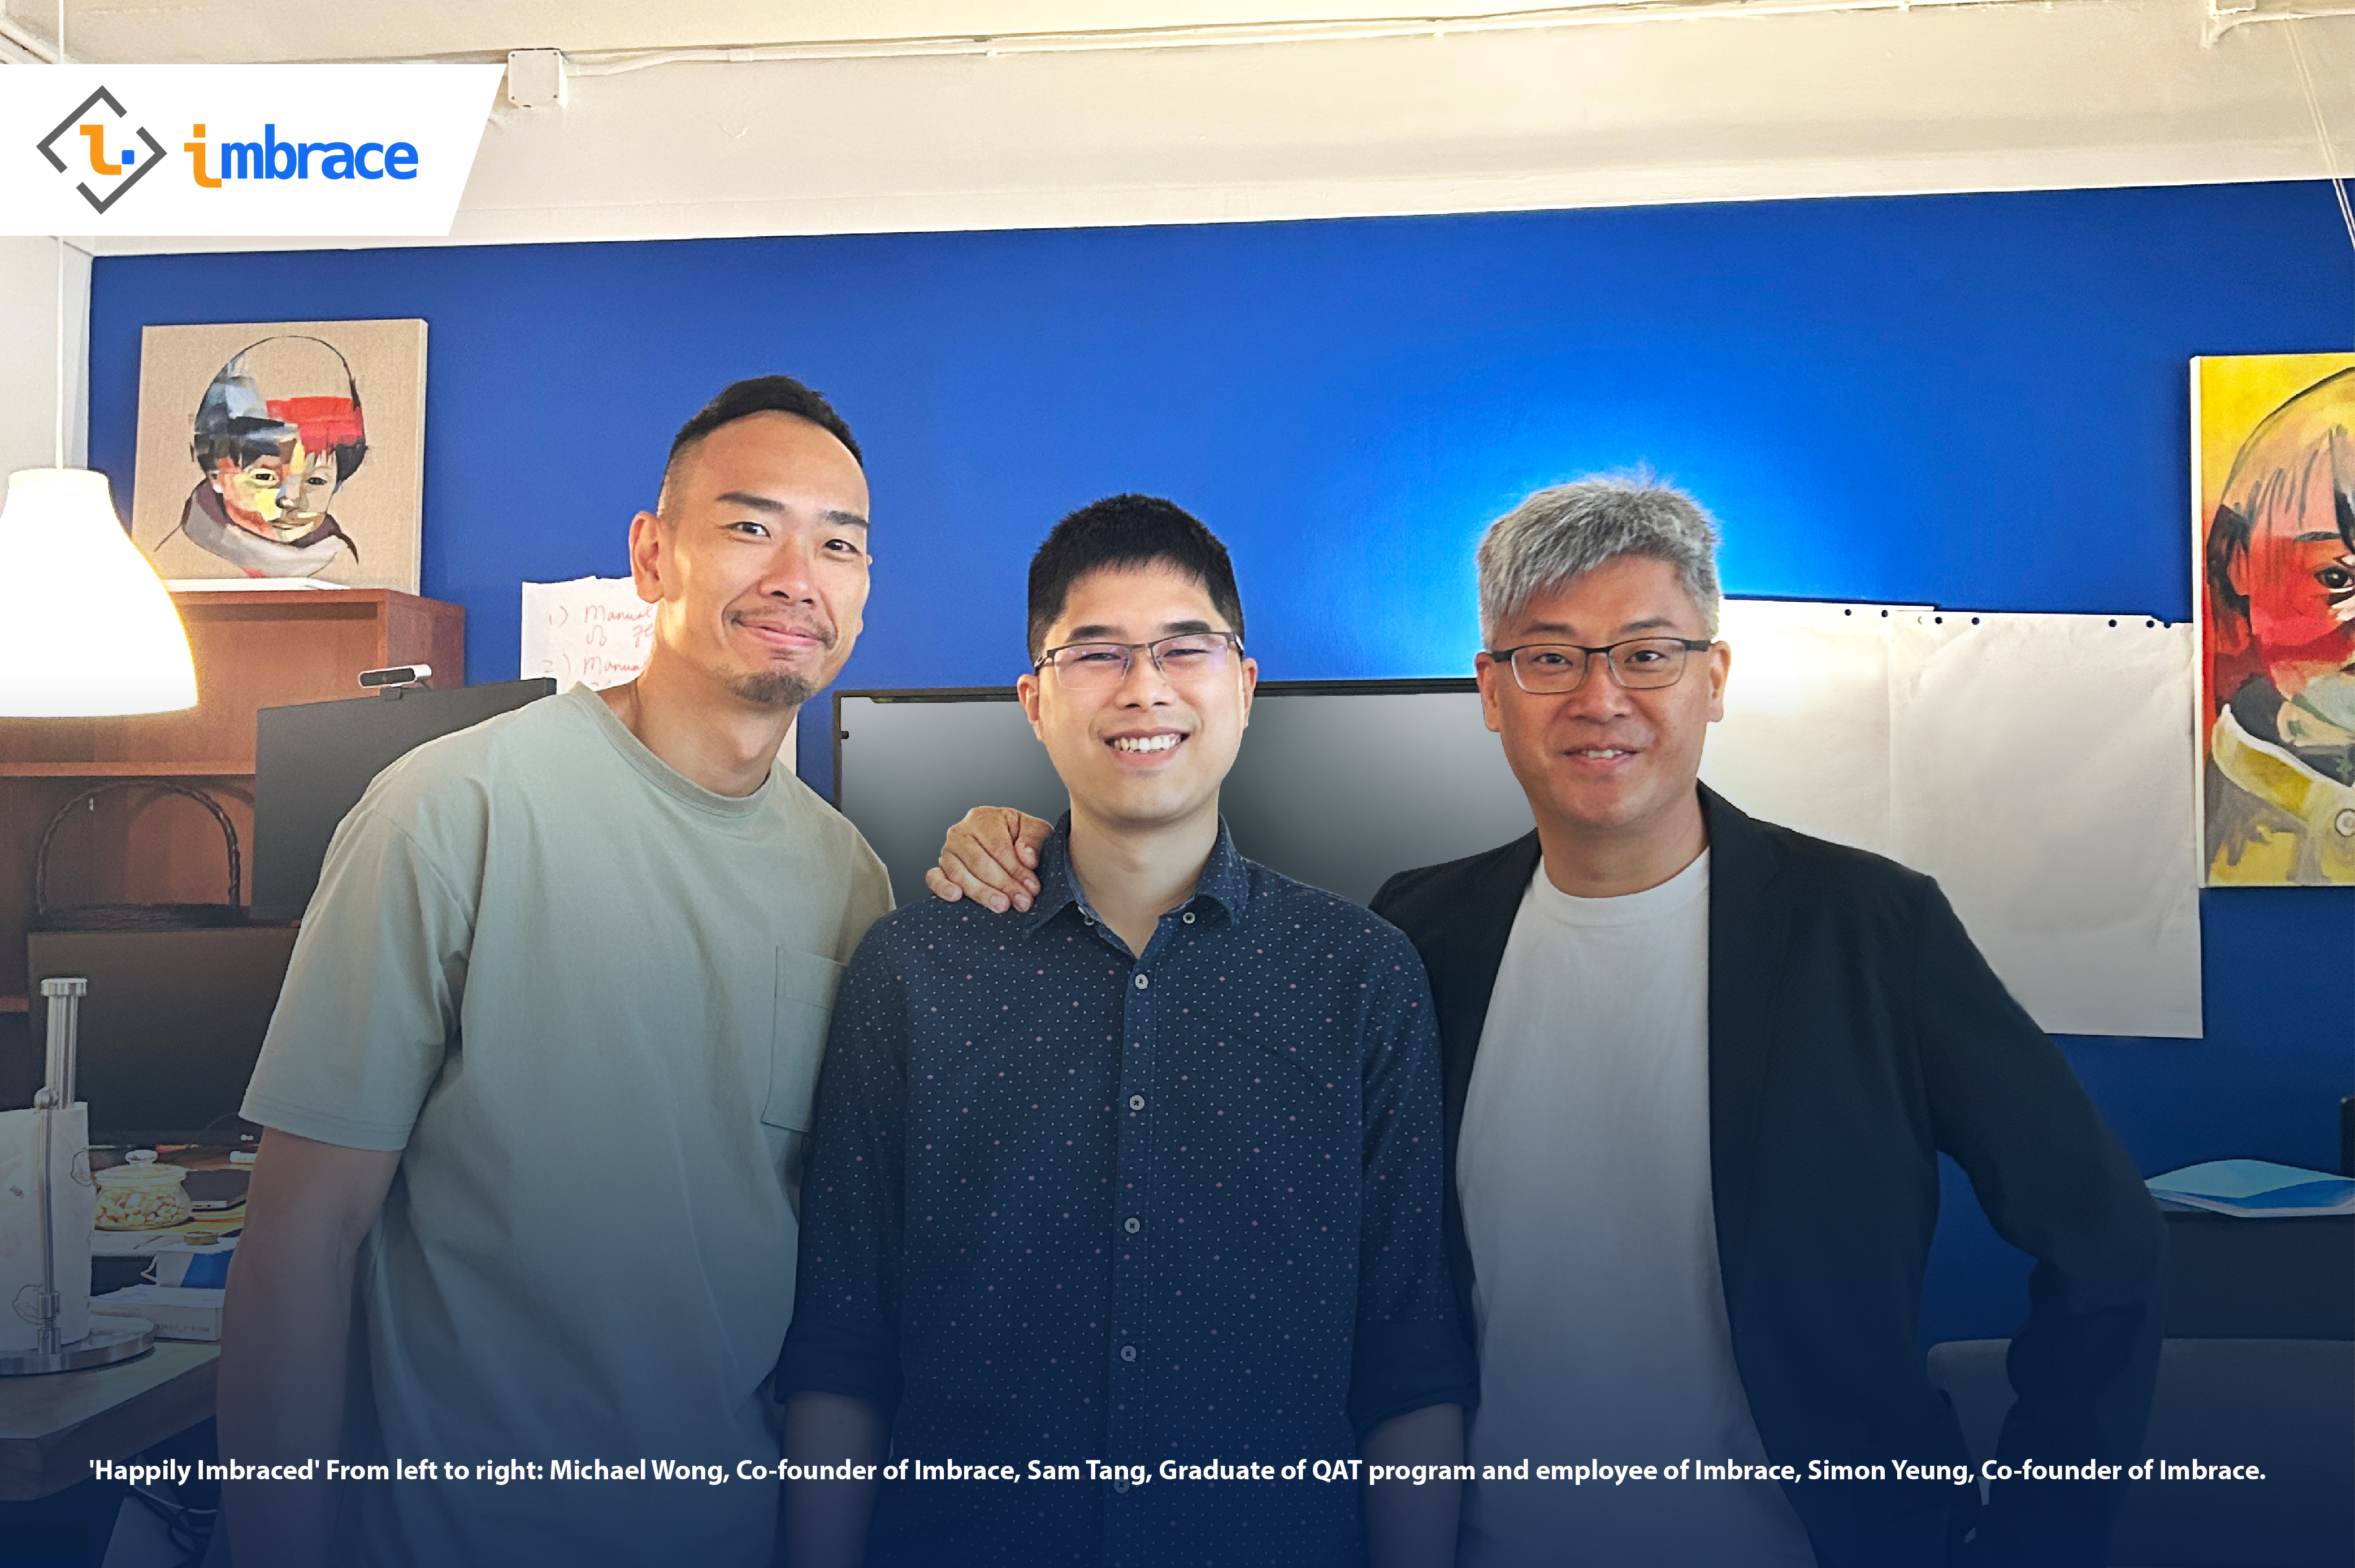 From left to right: Michael Wong, Co-founder of Imbrace, Sam Tang, Graduate of QAT program and employee of Imbrace, Simon Yeung, Co-founder of Imbrace.